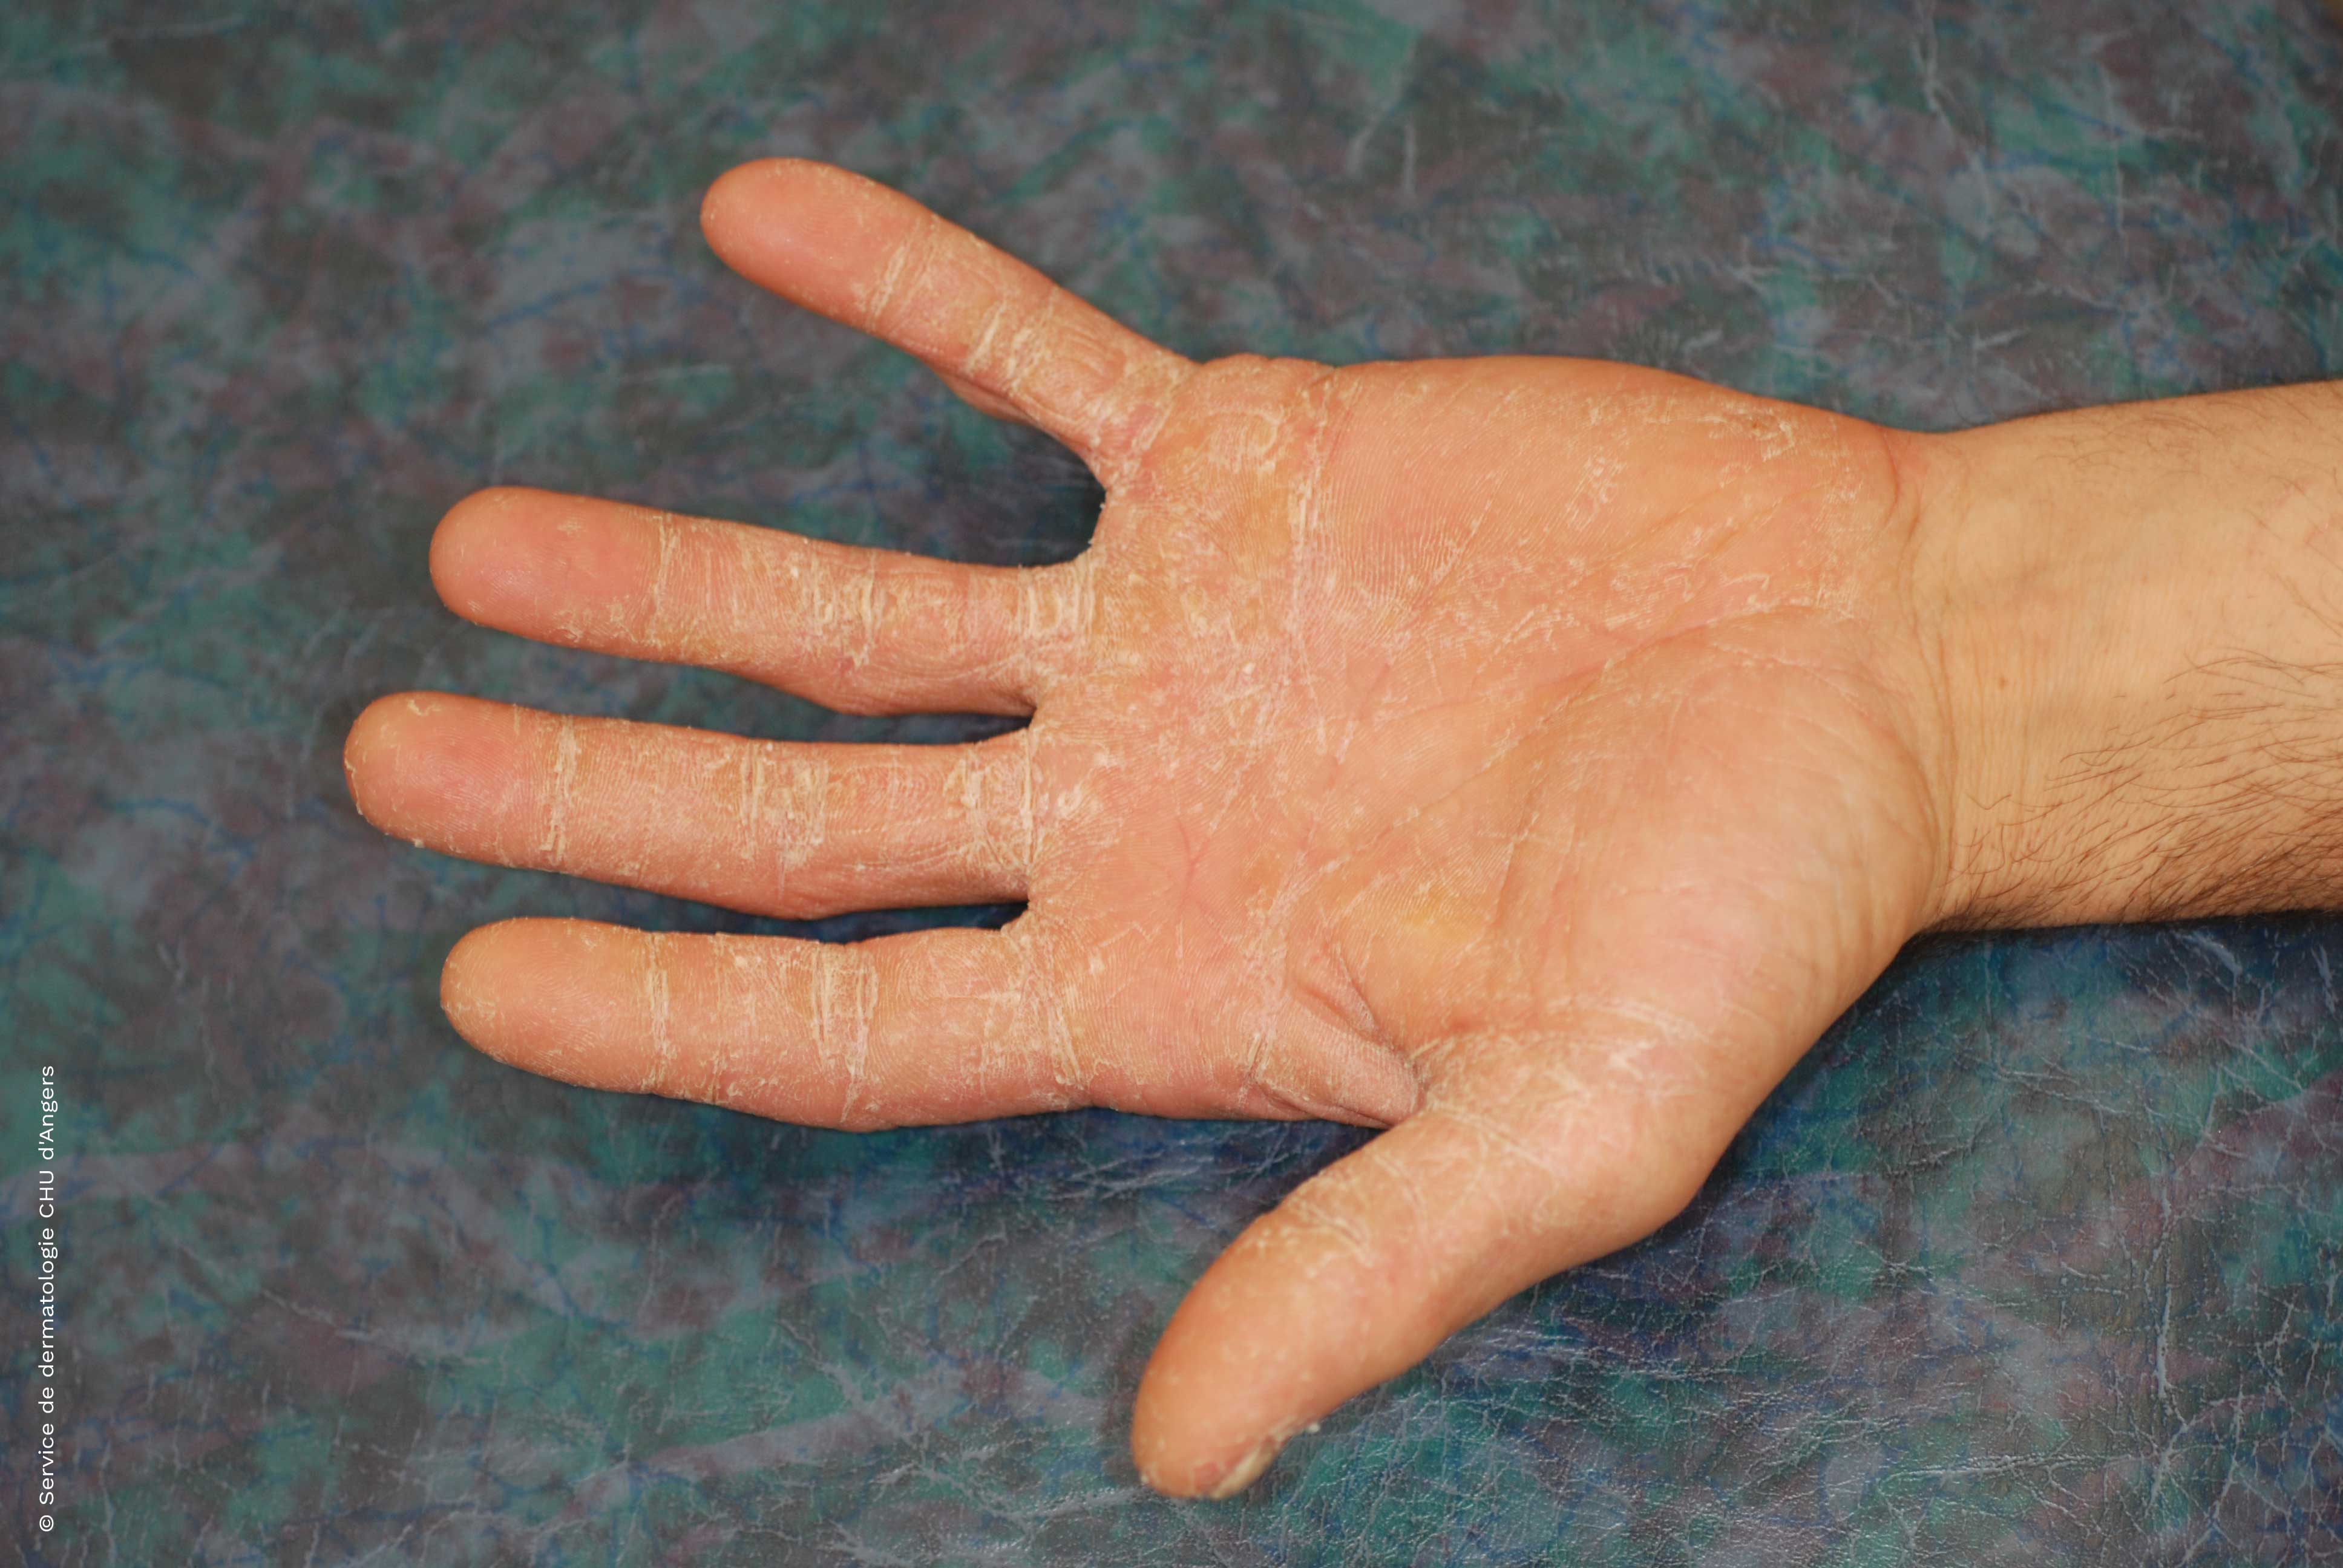 Dermatitis of the palm of the hand - differential diagnosis eczema